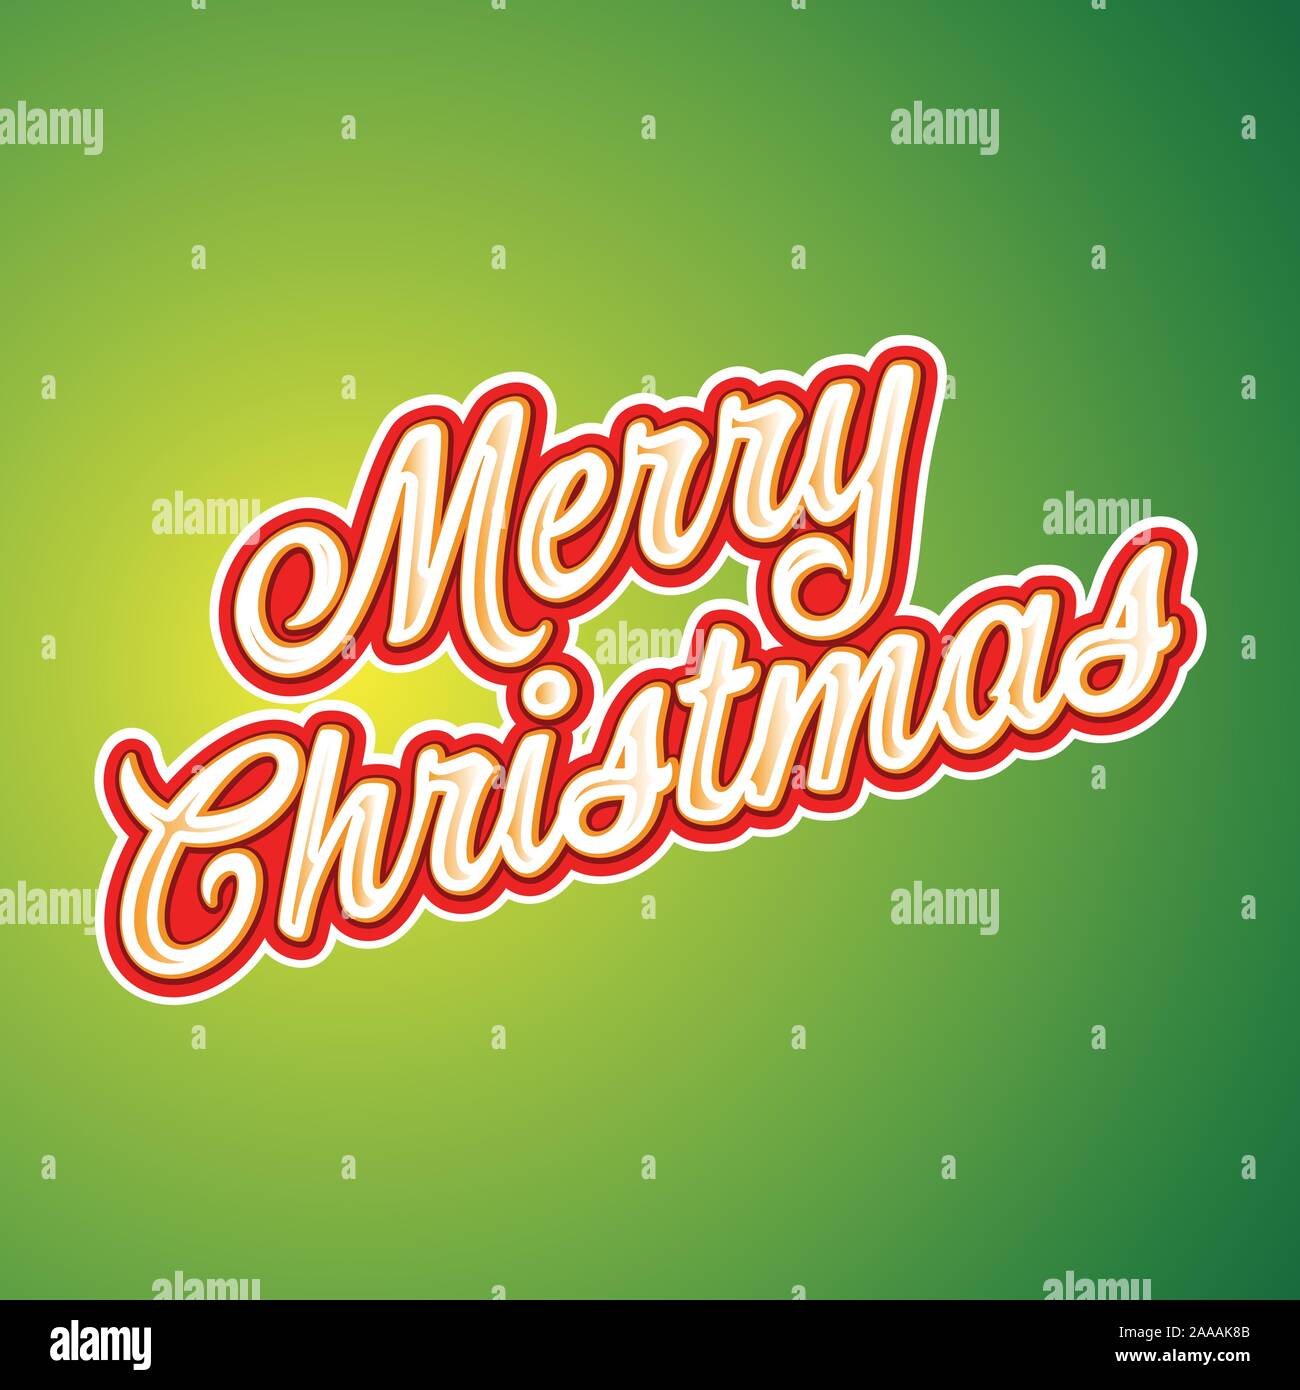 Merry Christmas Greetings Card sign Stock Vector